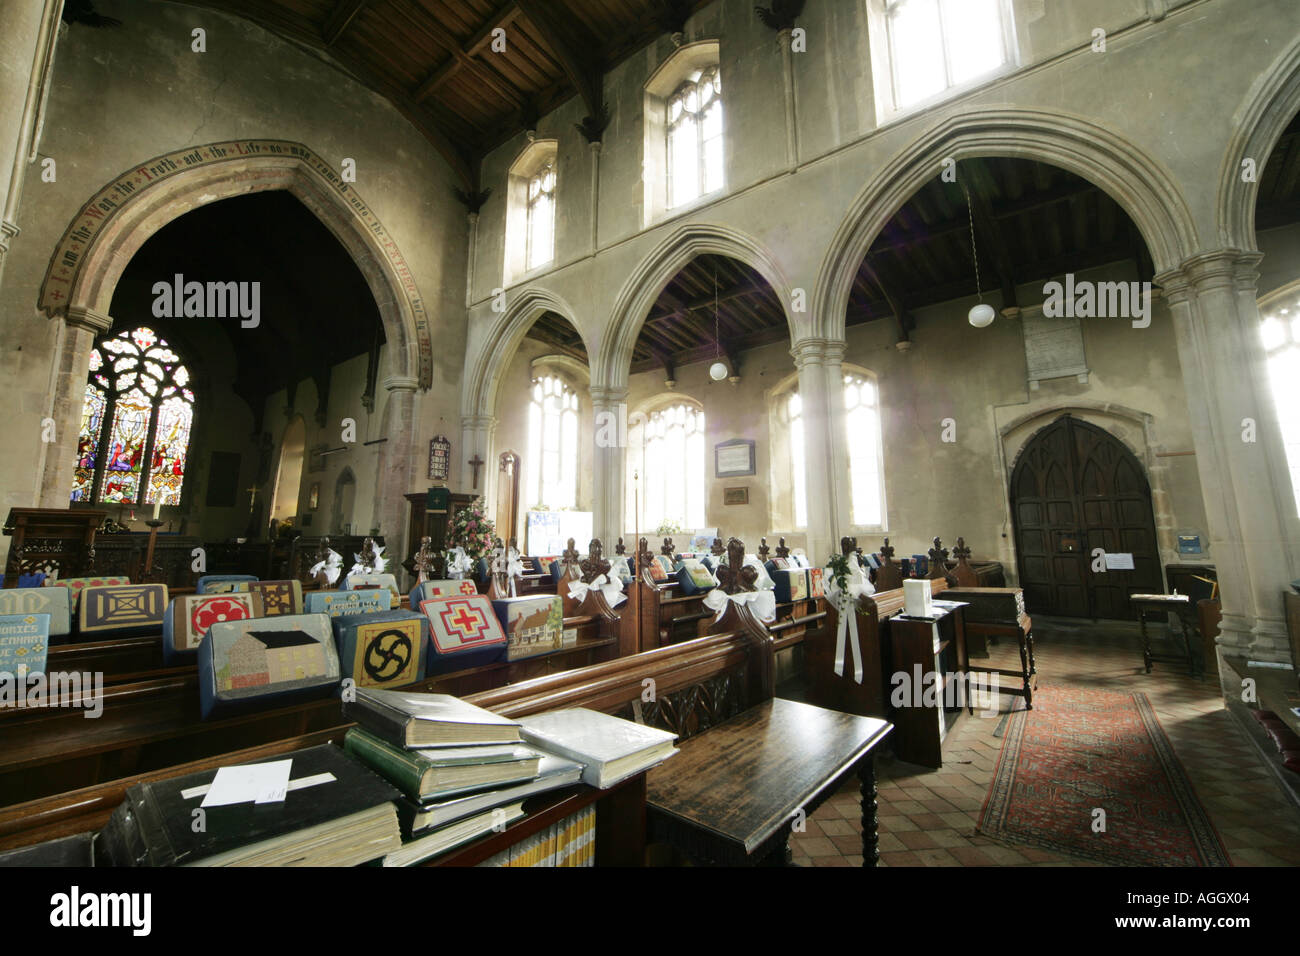 A church in Ixworth Suffolk UK decorated and prepared for a wedding ceremony Stock Photo